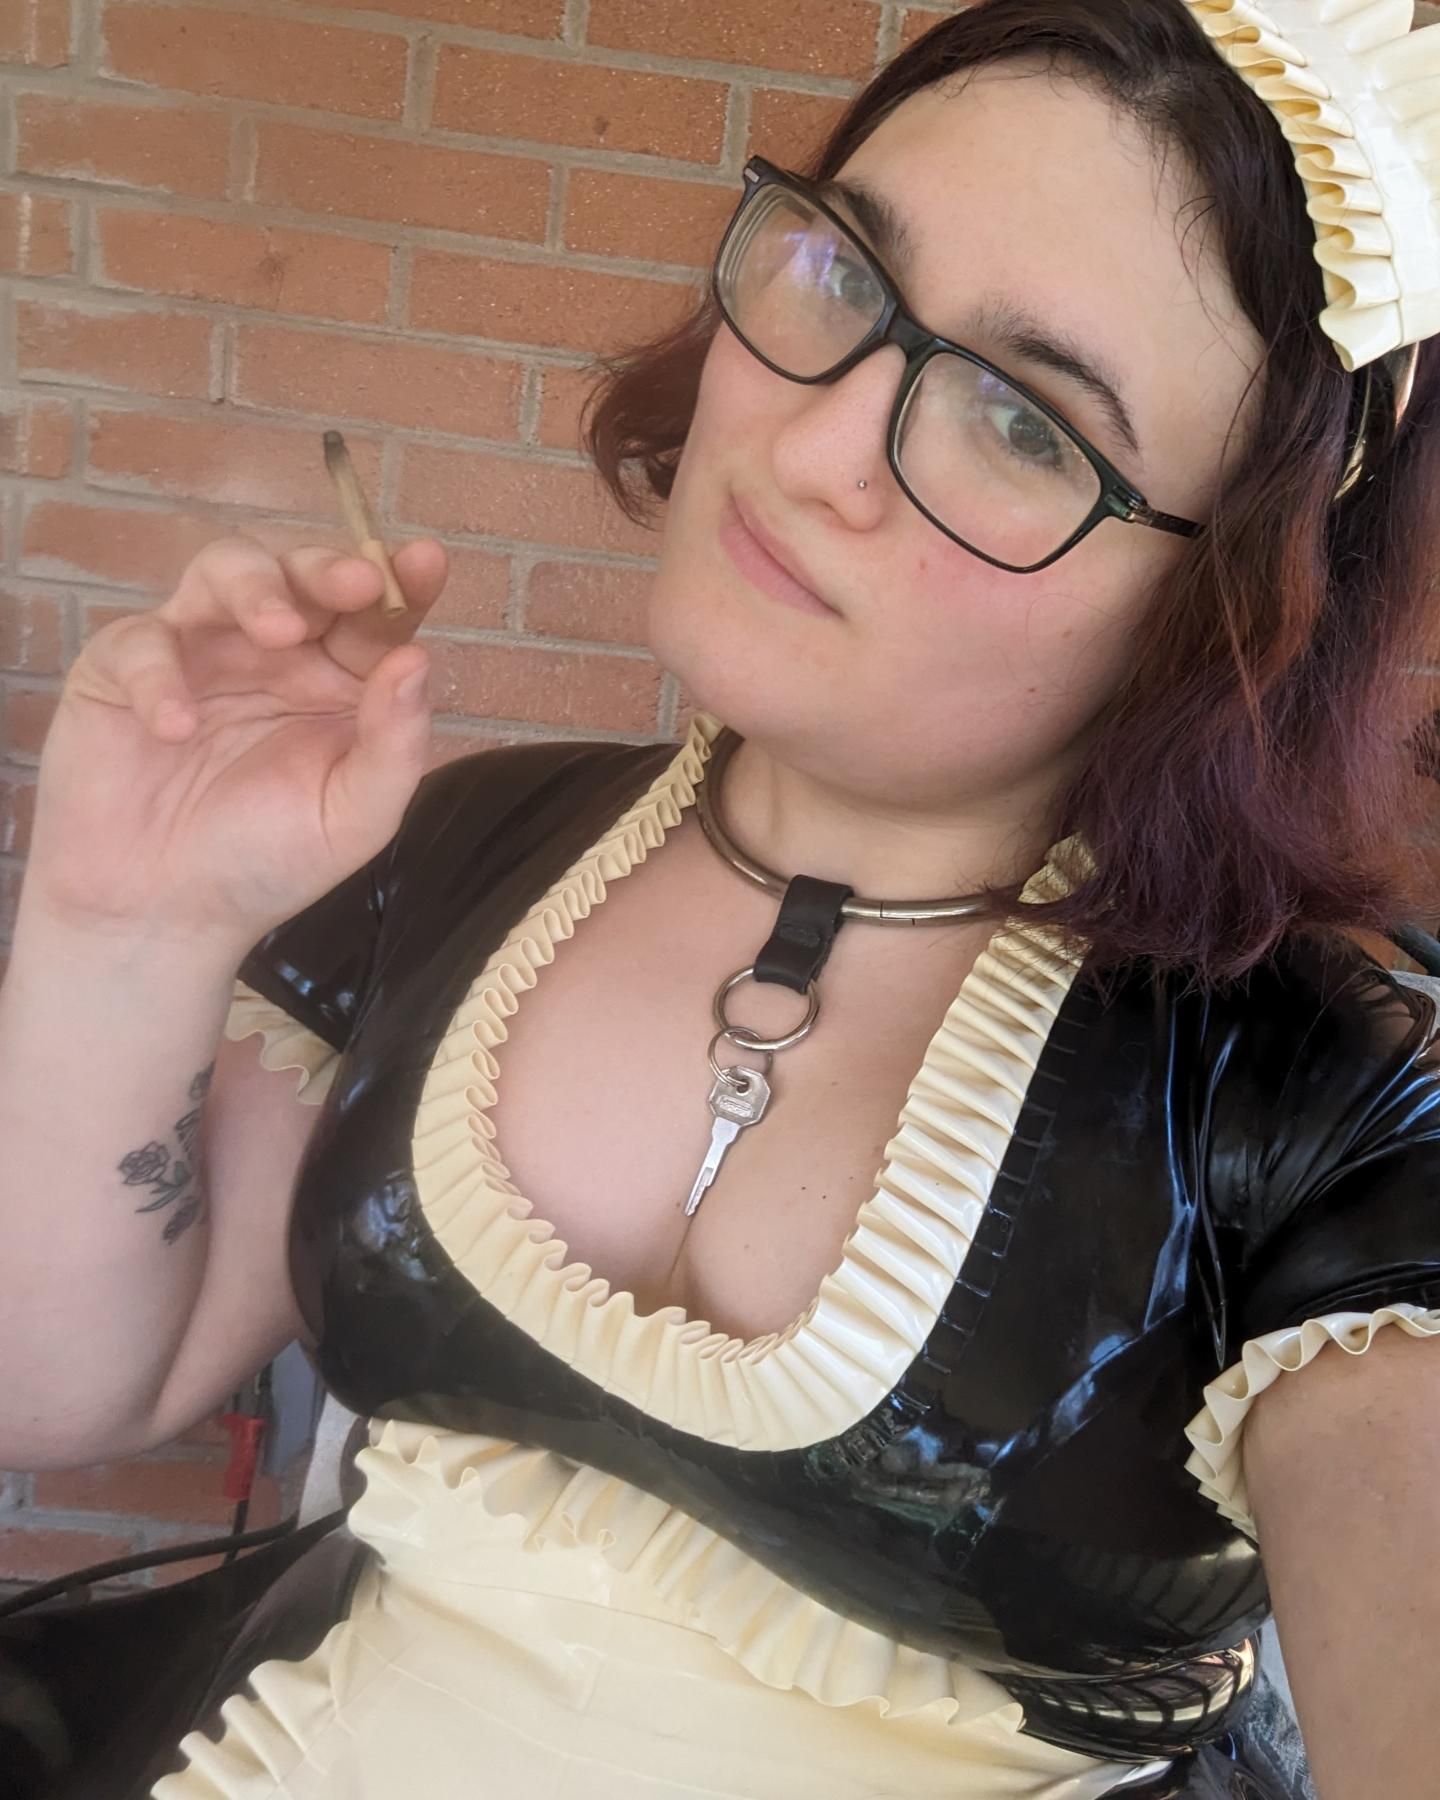 The Maid is on a Small Smoke break 💕☺️ feeling good about today! How are you doing? ☺️💕